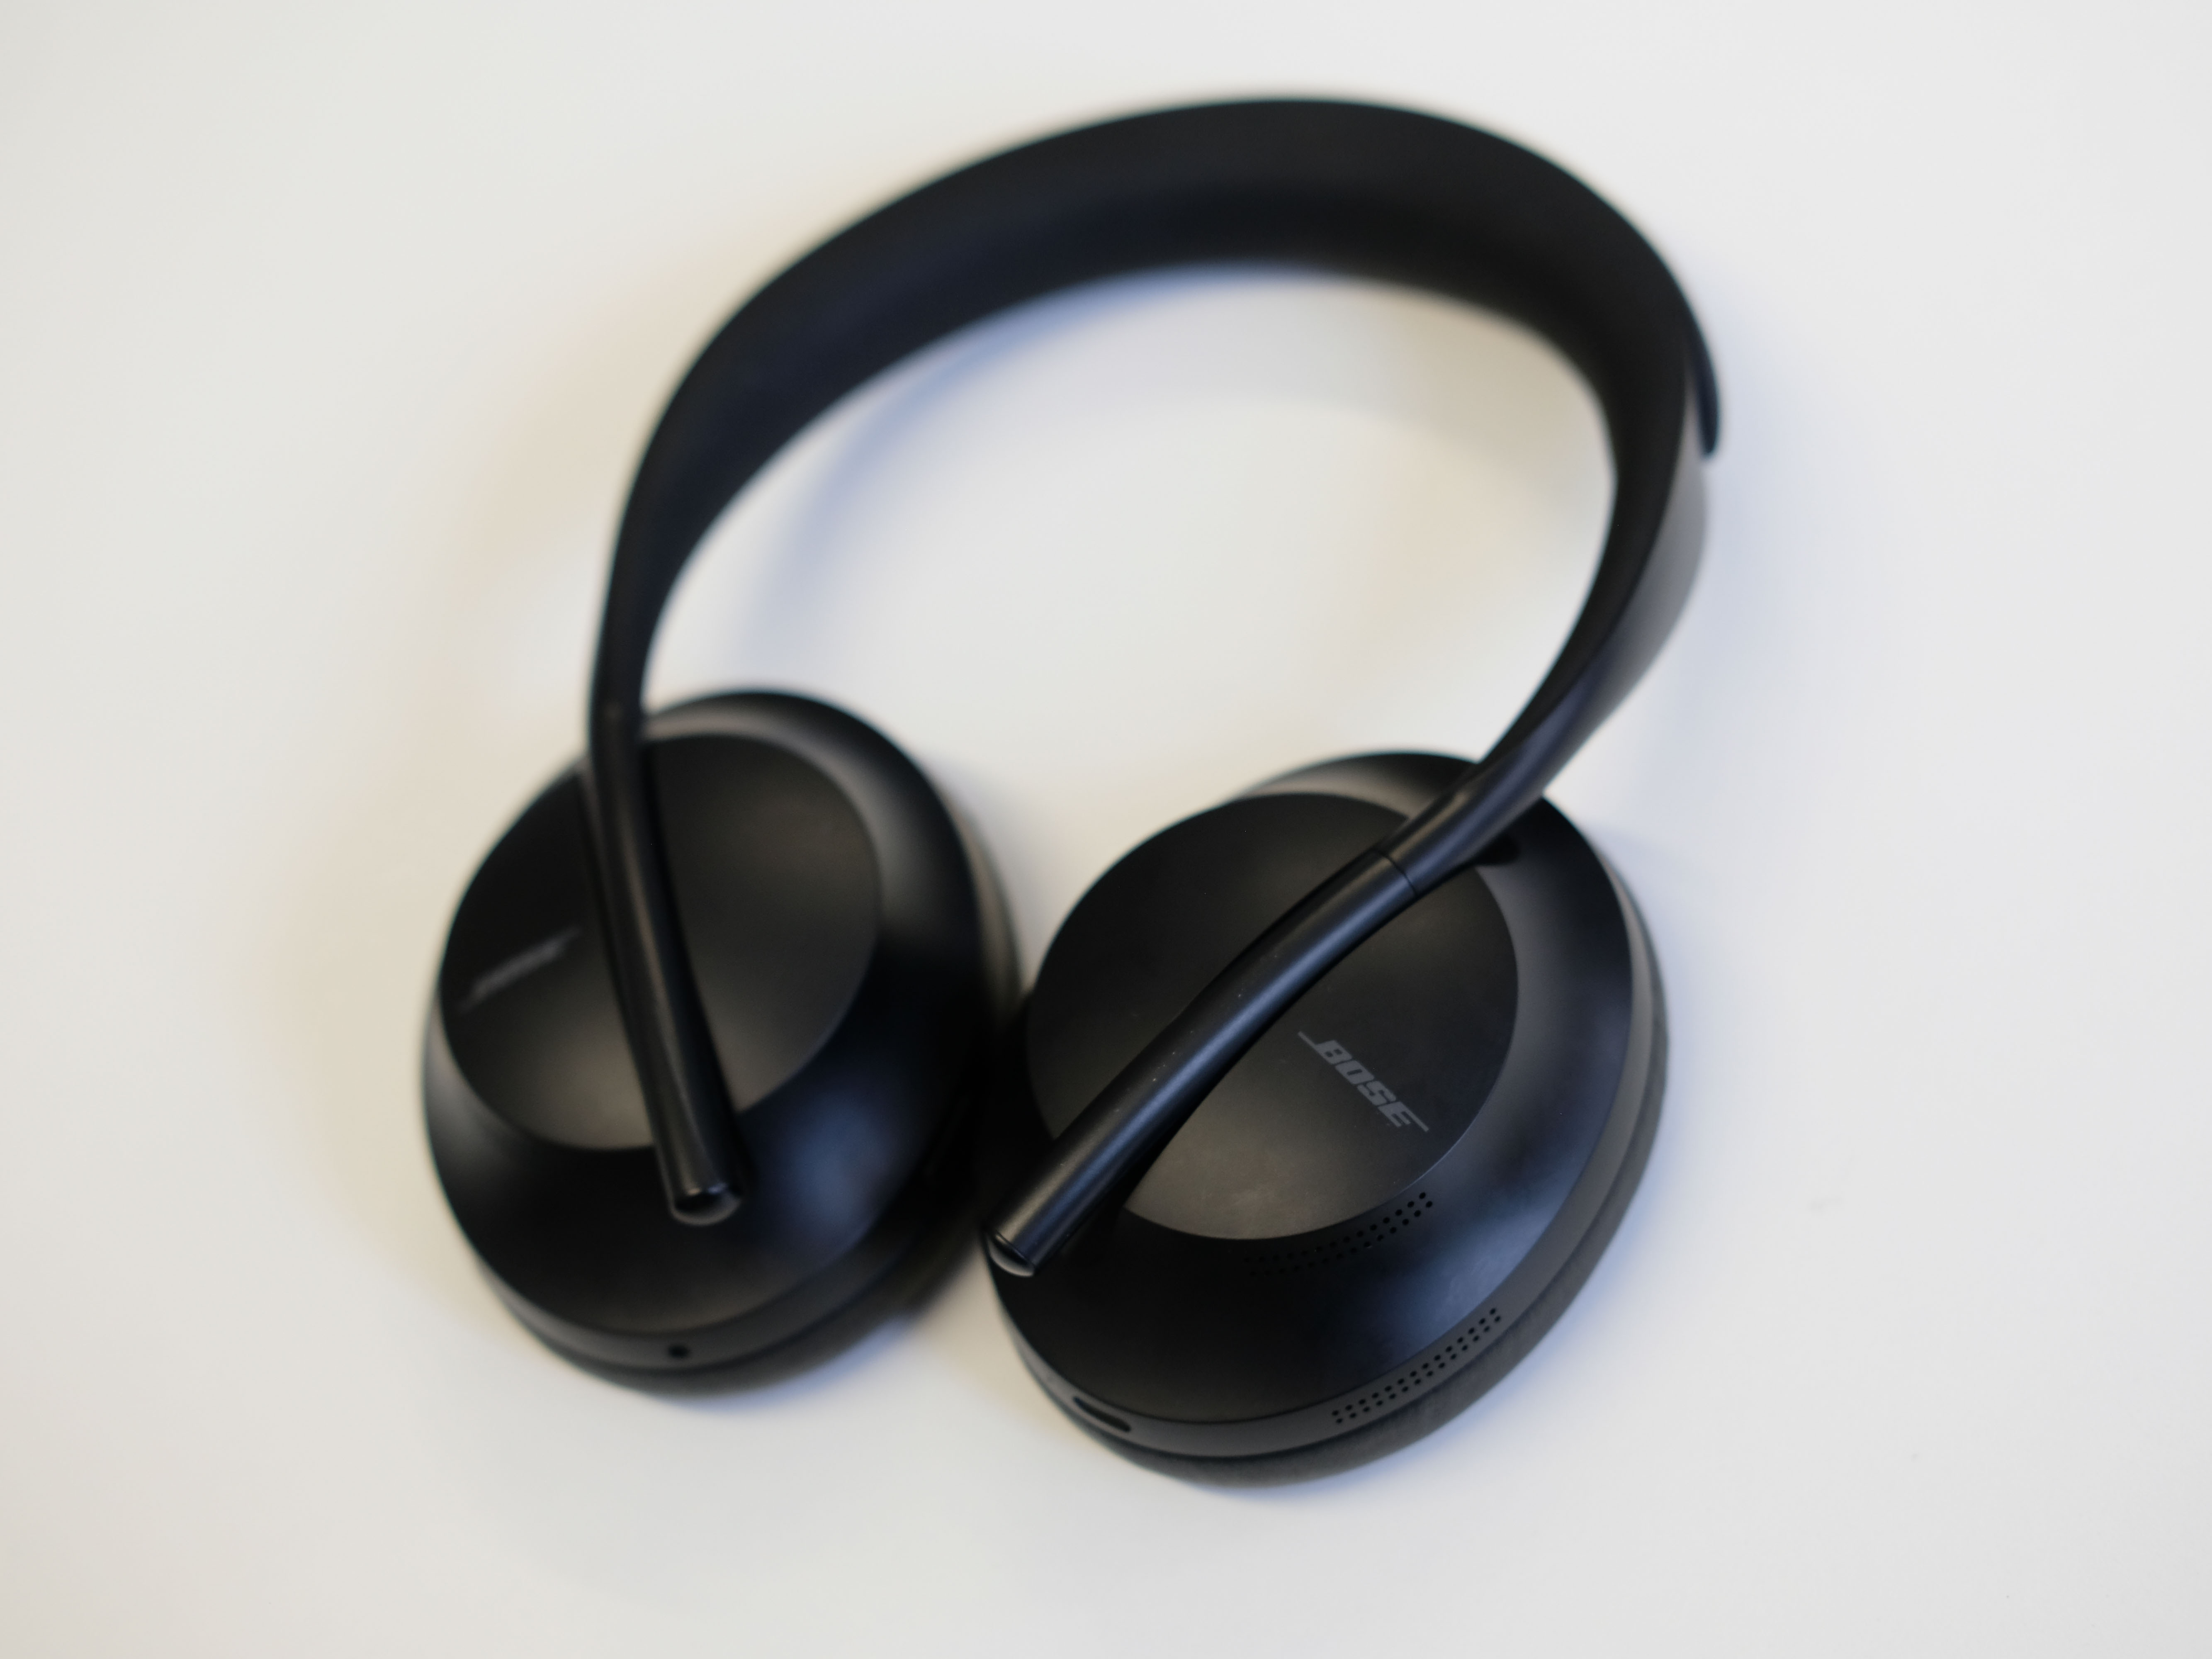 Bose Noise Cancelling Headphones UC 700 review